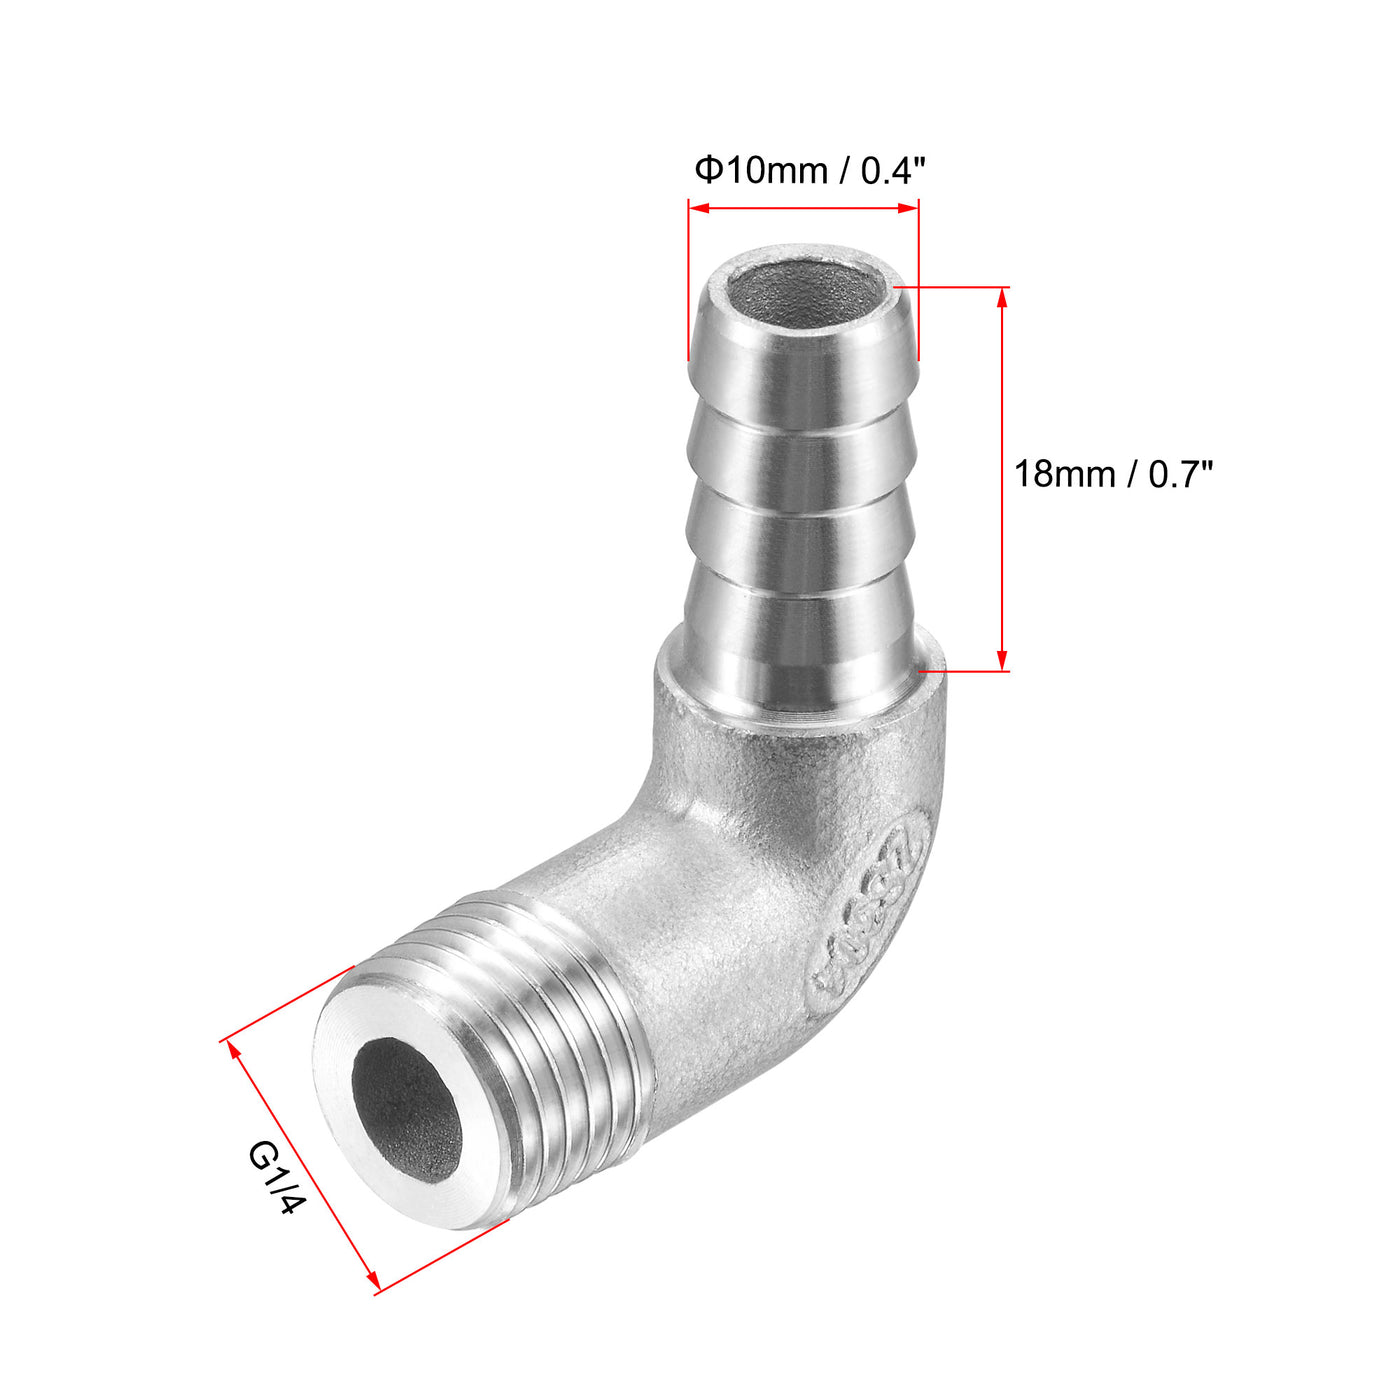 Uxcell Uxcell Stainless Steel Hose Barb Fitting Elbow 8mm x G1/4 Male Pipe Connector